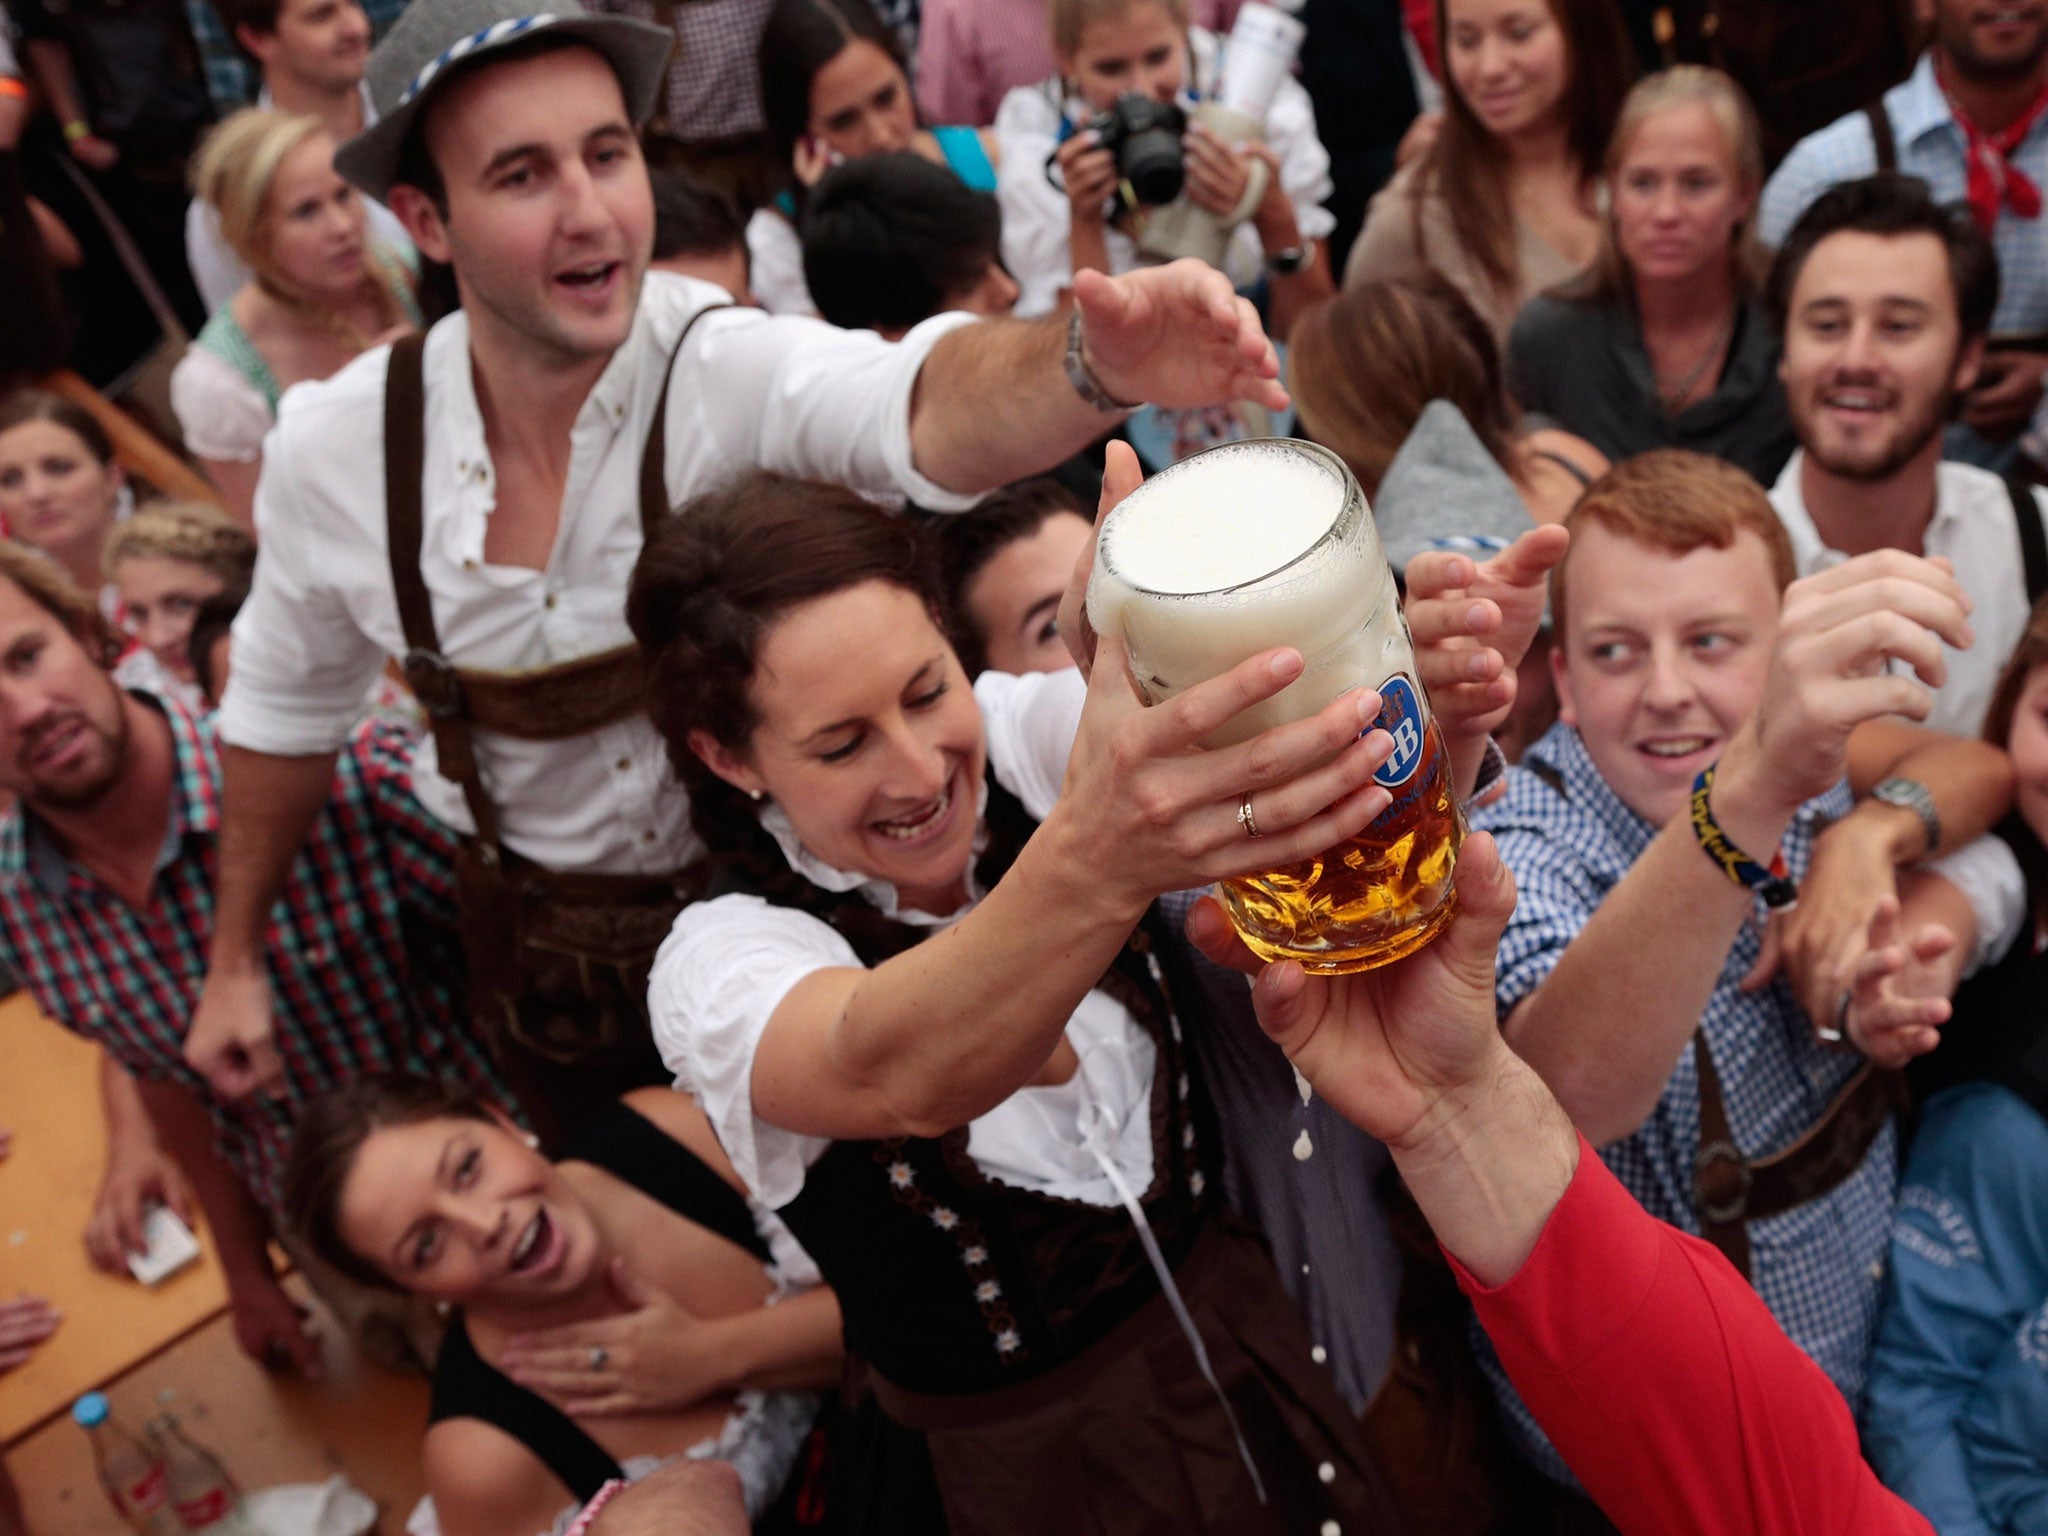 Foreign revellers are encouraged to drink to excess at the Munich beer festival